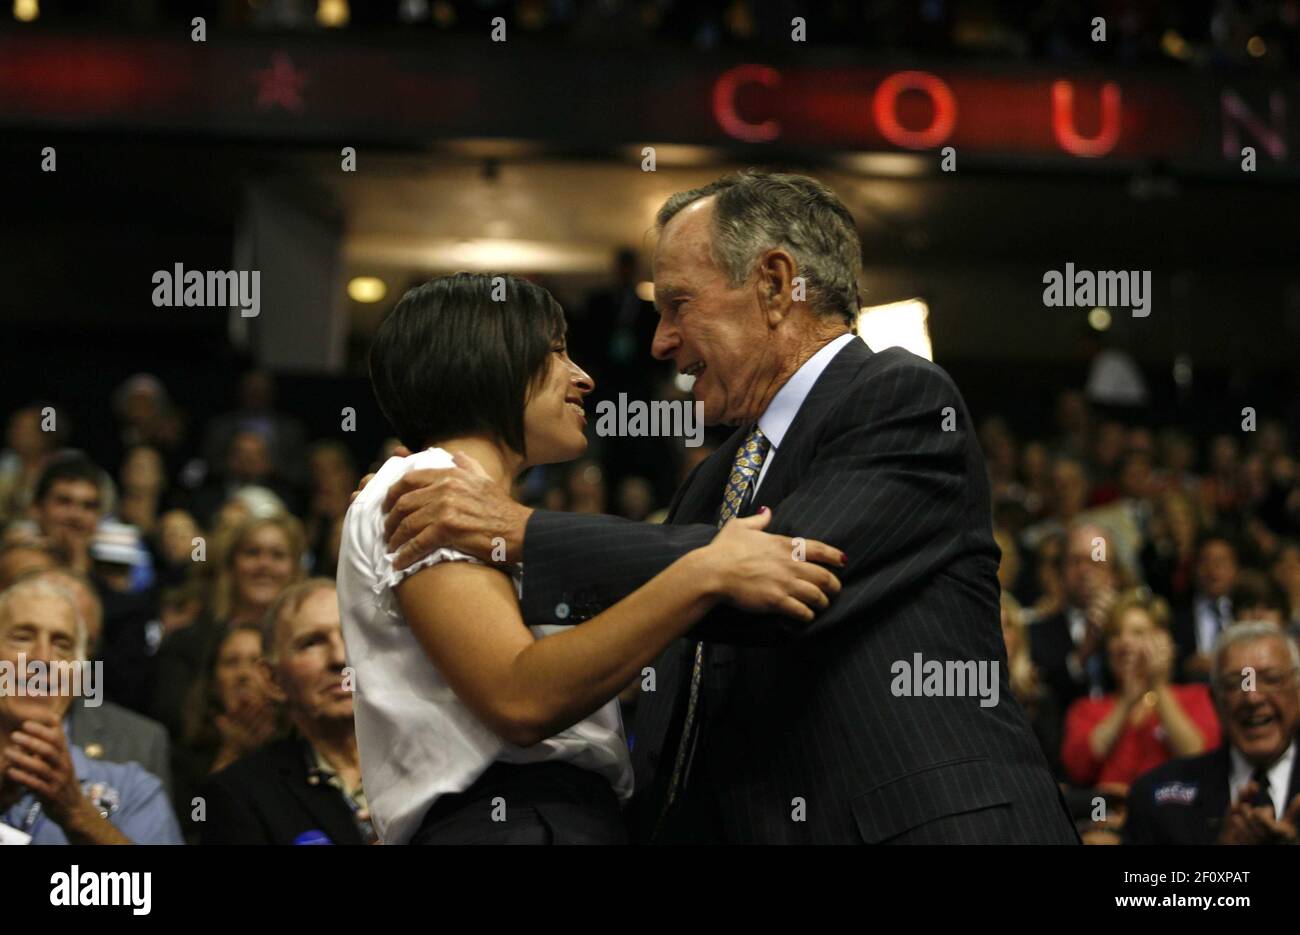 2 September 2008 - St. Paul, MN - Former President George H. W. Bush attends the Republican Convention with his wife Barbara. They were sitting in the stands to show their support for Republican presidential nominee John McCain. Photo Credit: Gary Fabiano/Sipa Press/0809031405 Stock Photo